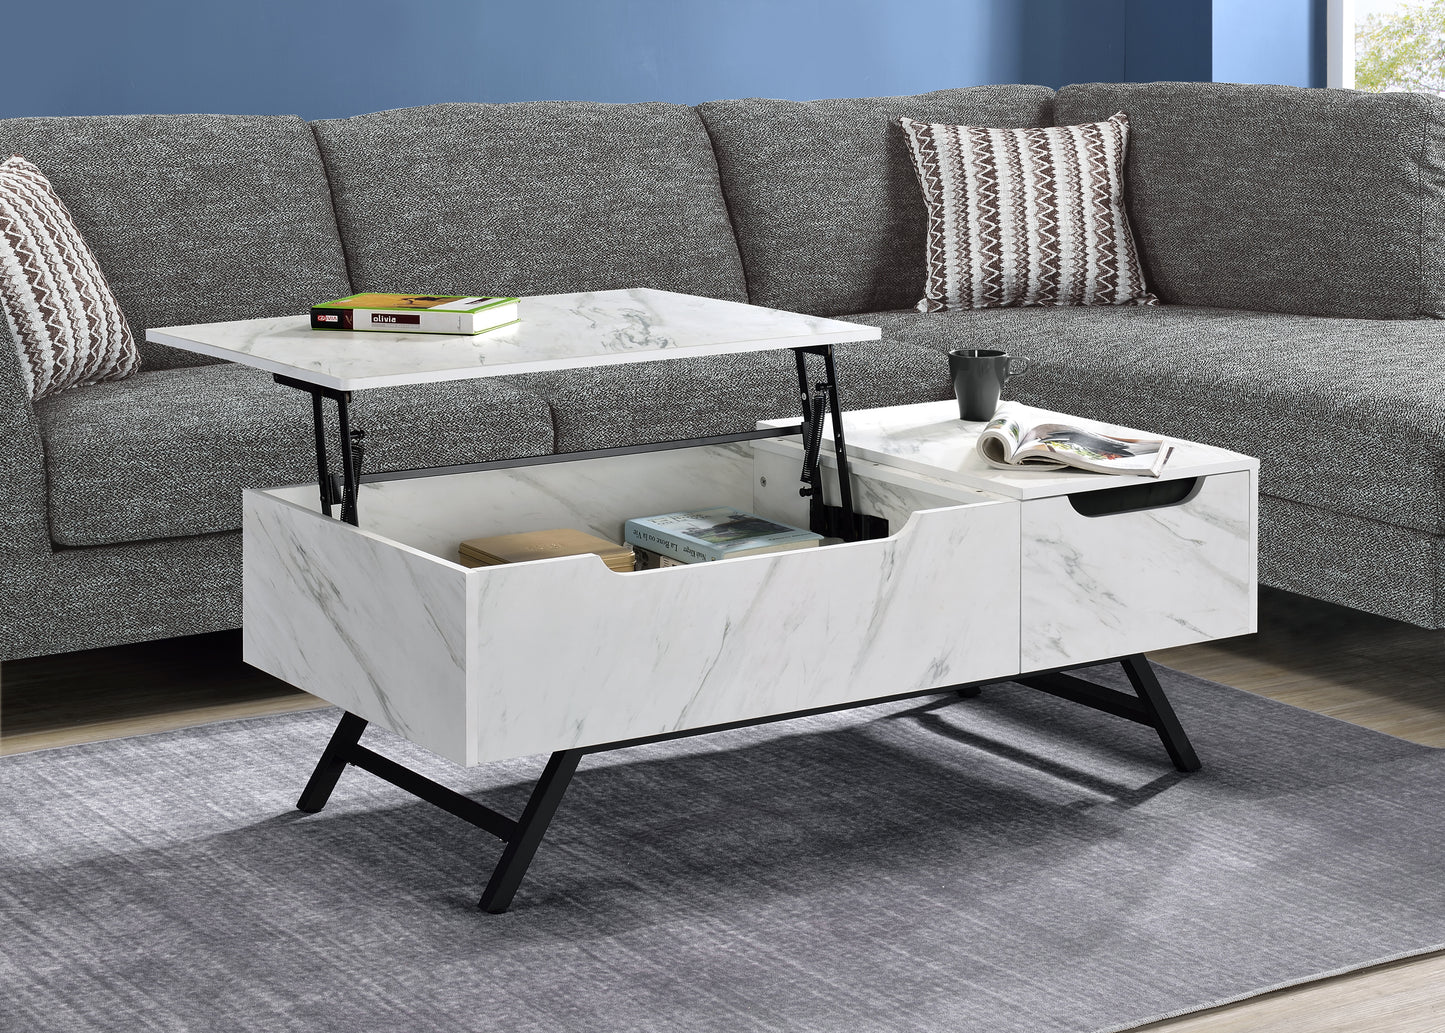 ACME Throm Coffee Table w/Lift Top, White Finish LV00830 - Enova Luxe Home Store